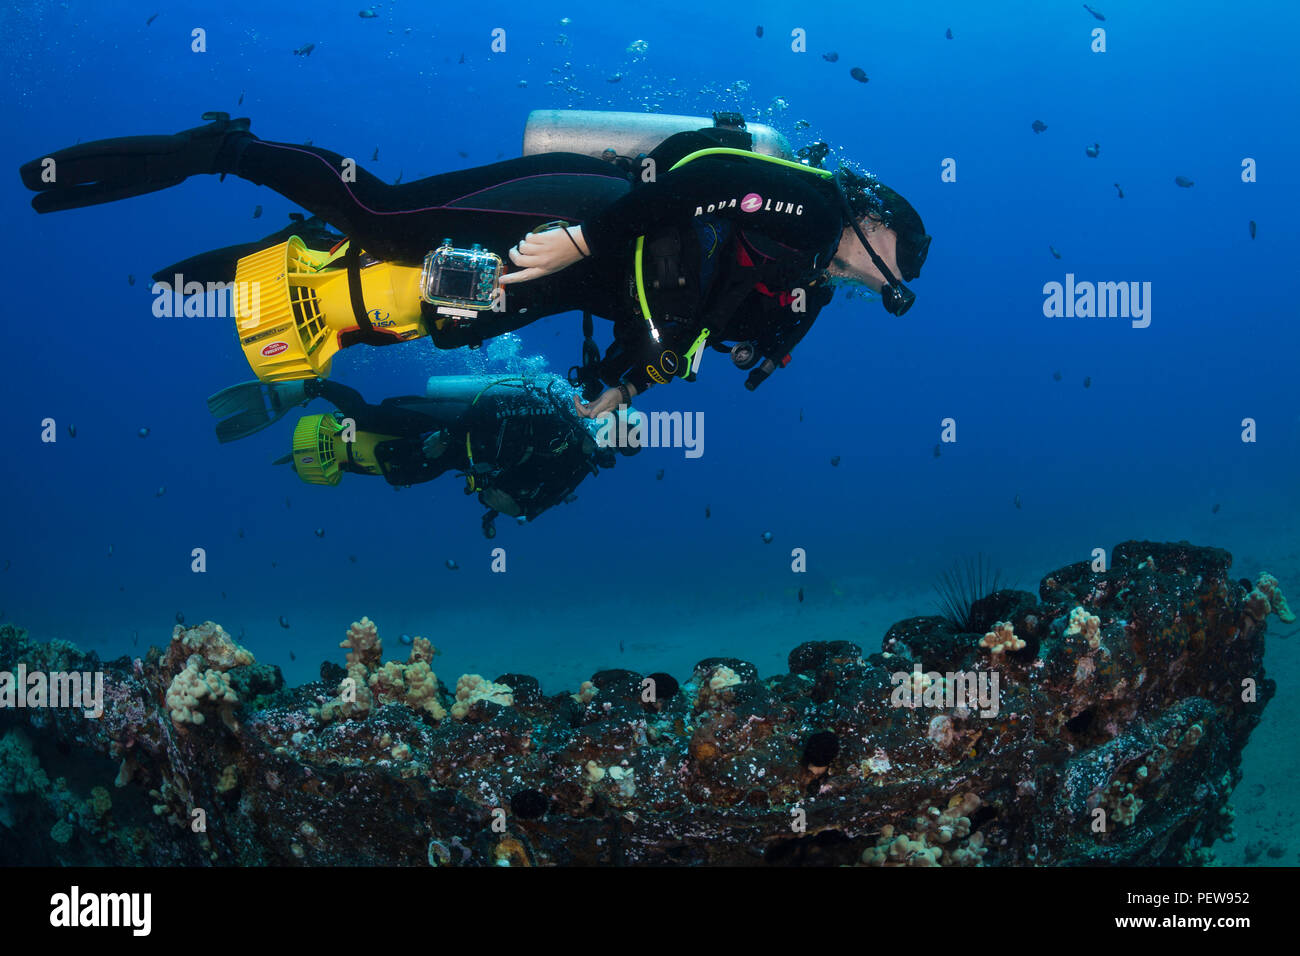 Two divers (MR) investigate a wreck off South Maui on underwater scooters that you can ride on.  Hawaii. Stock Photo